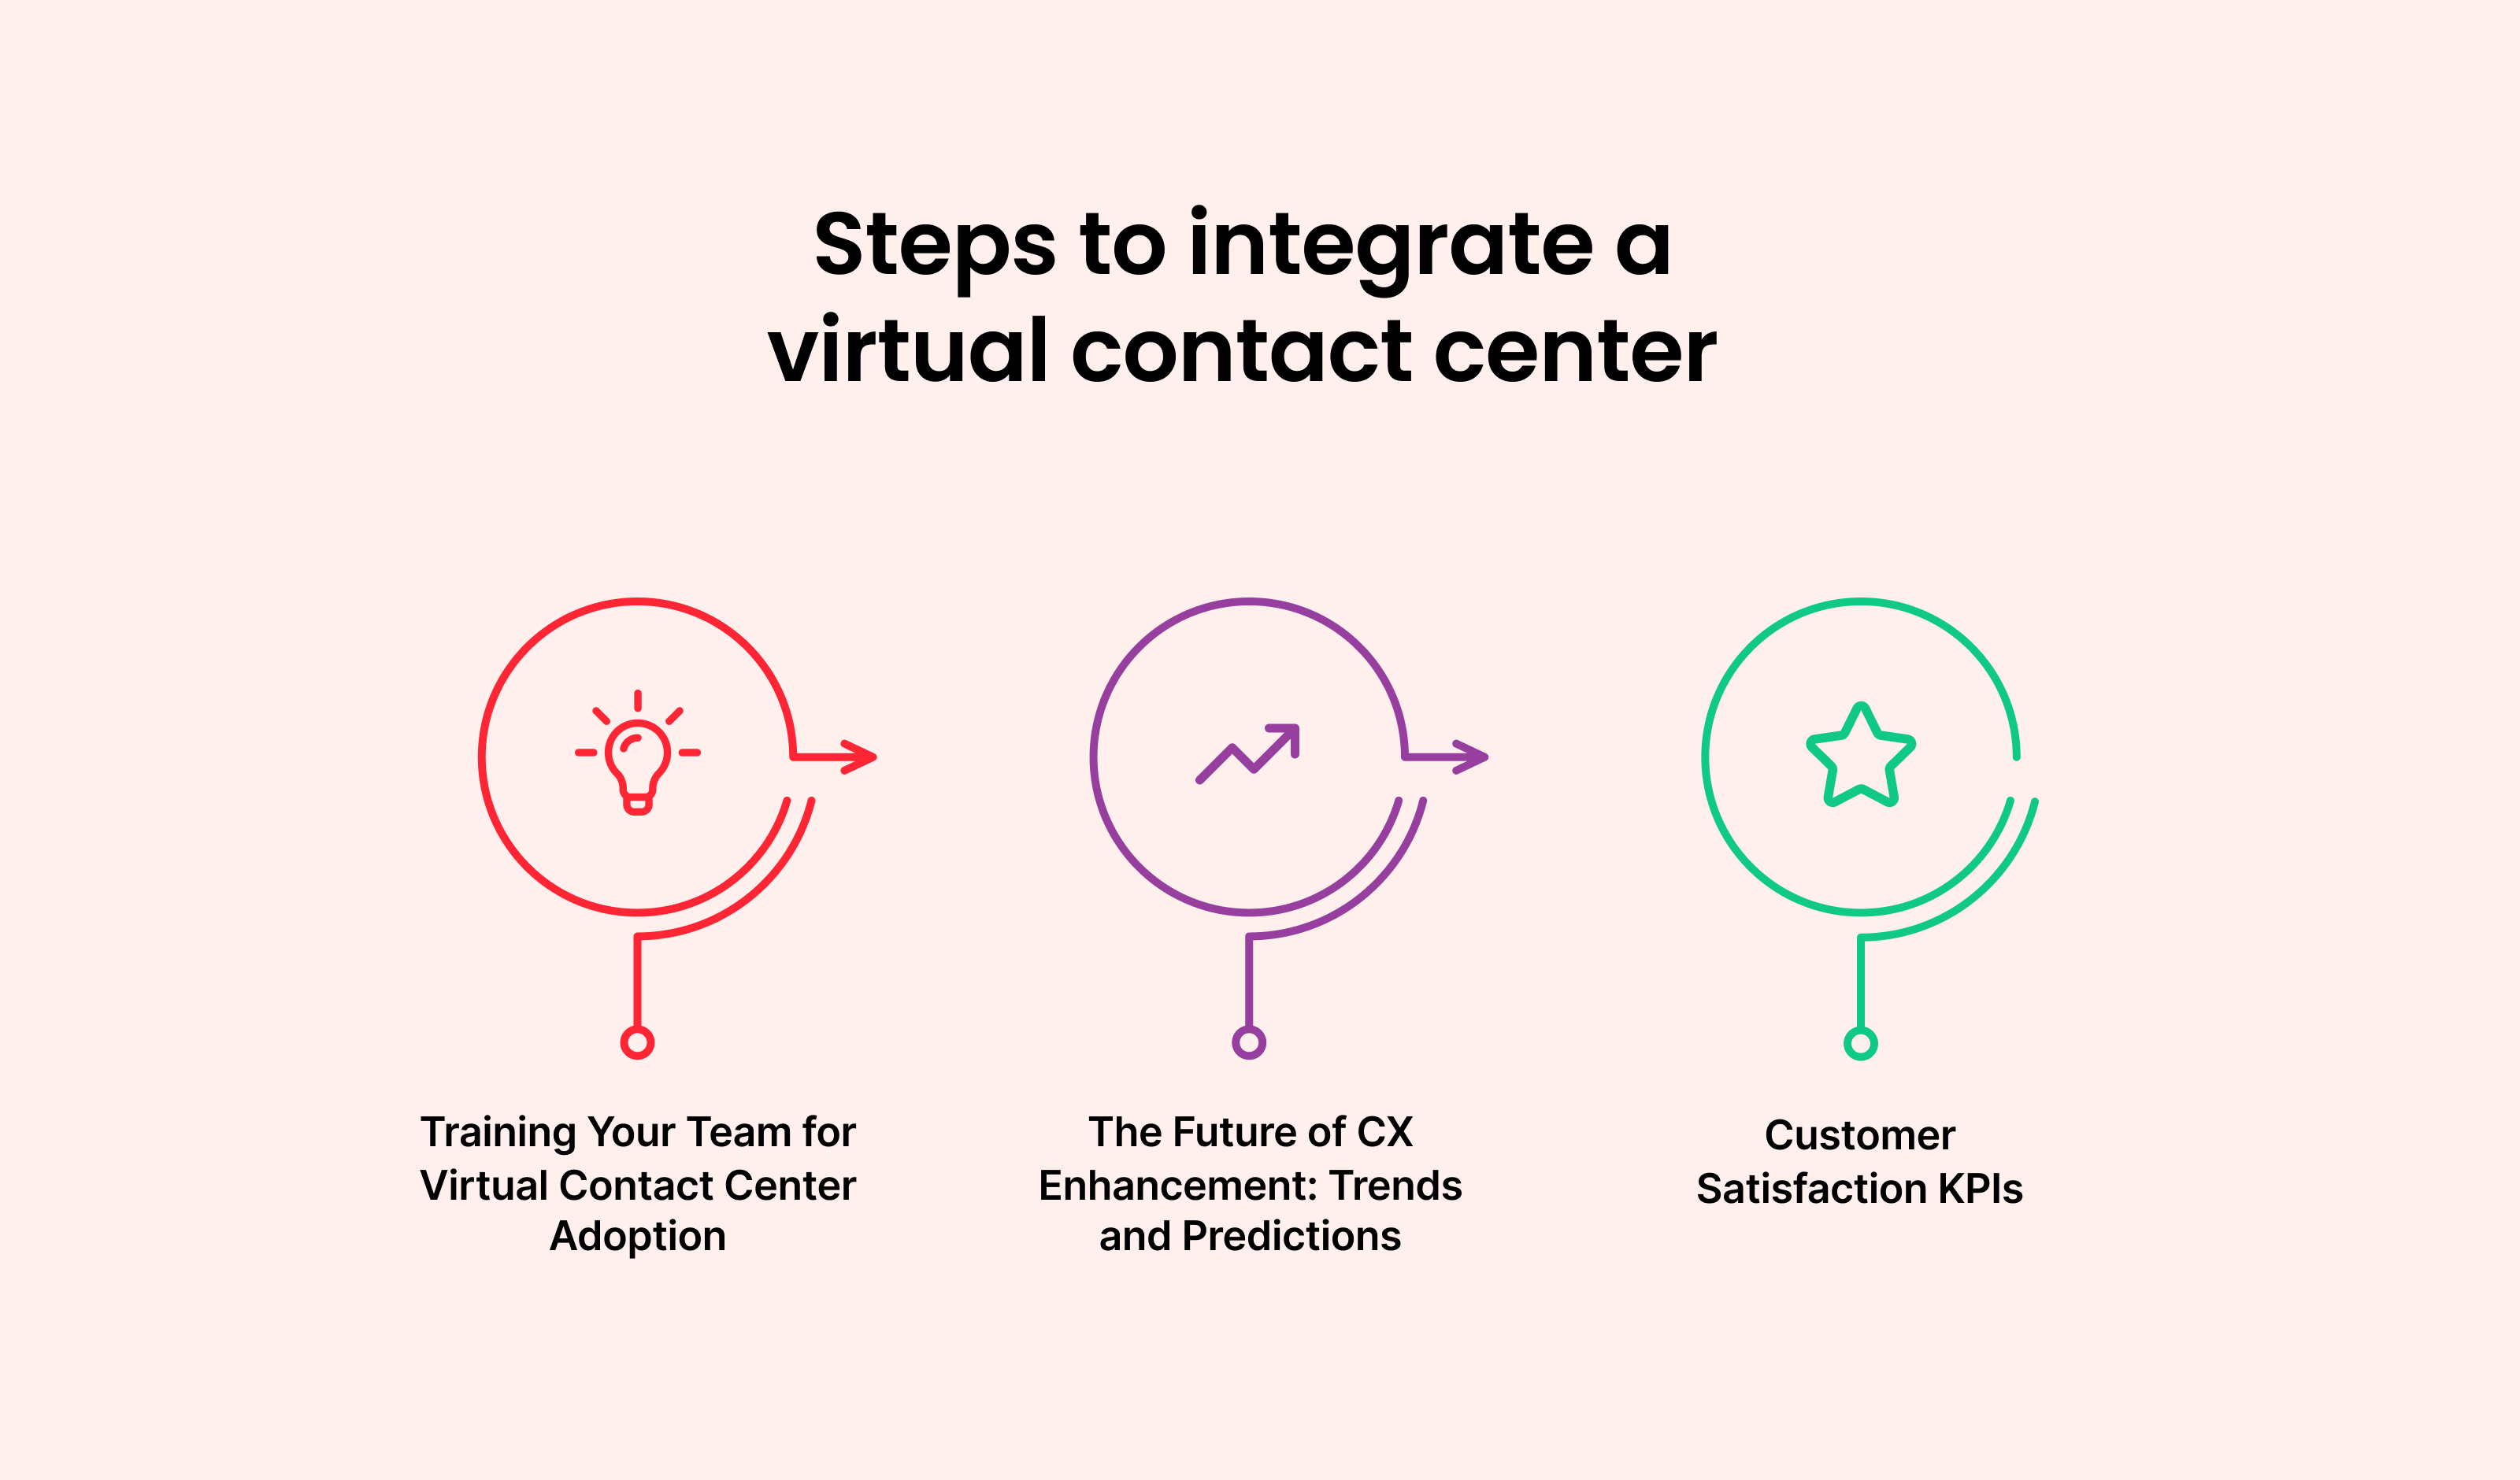 Steps to Integrate a Virtual Contact Center: